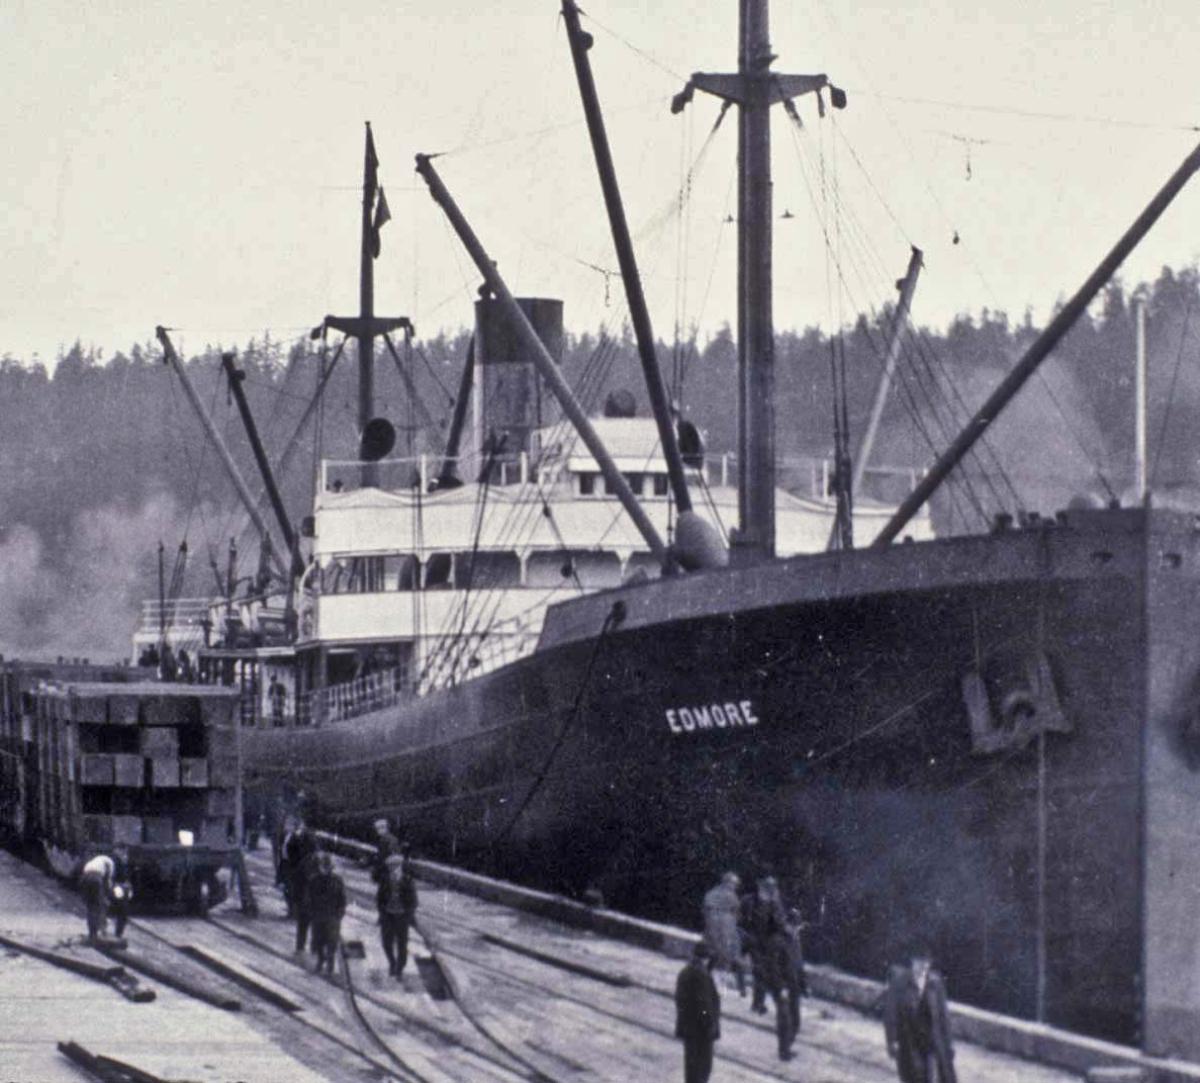 black and white photo of a steamship